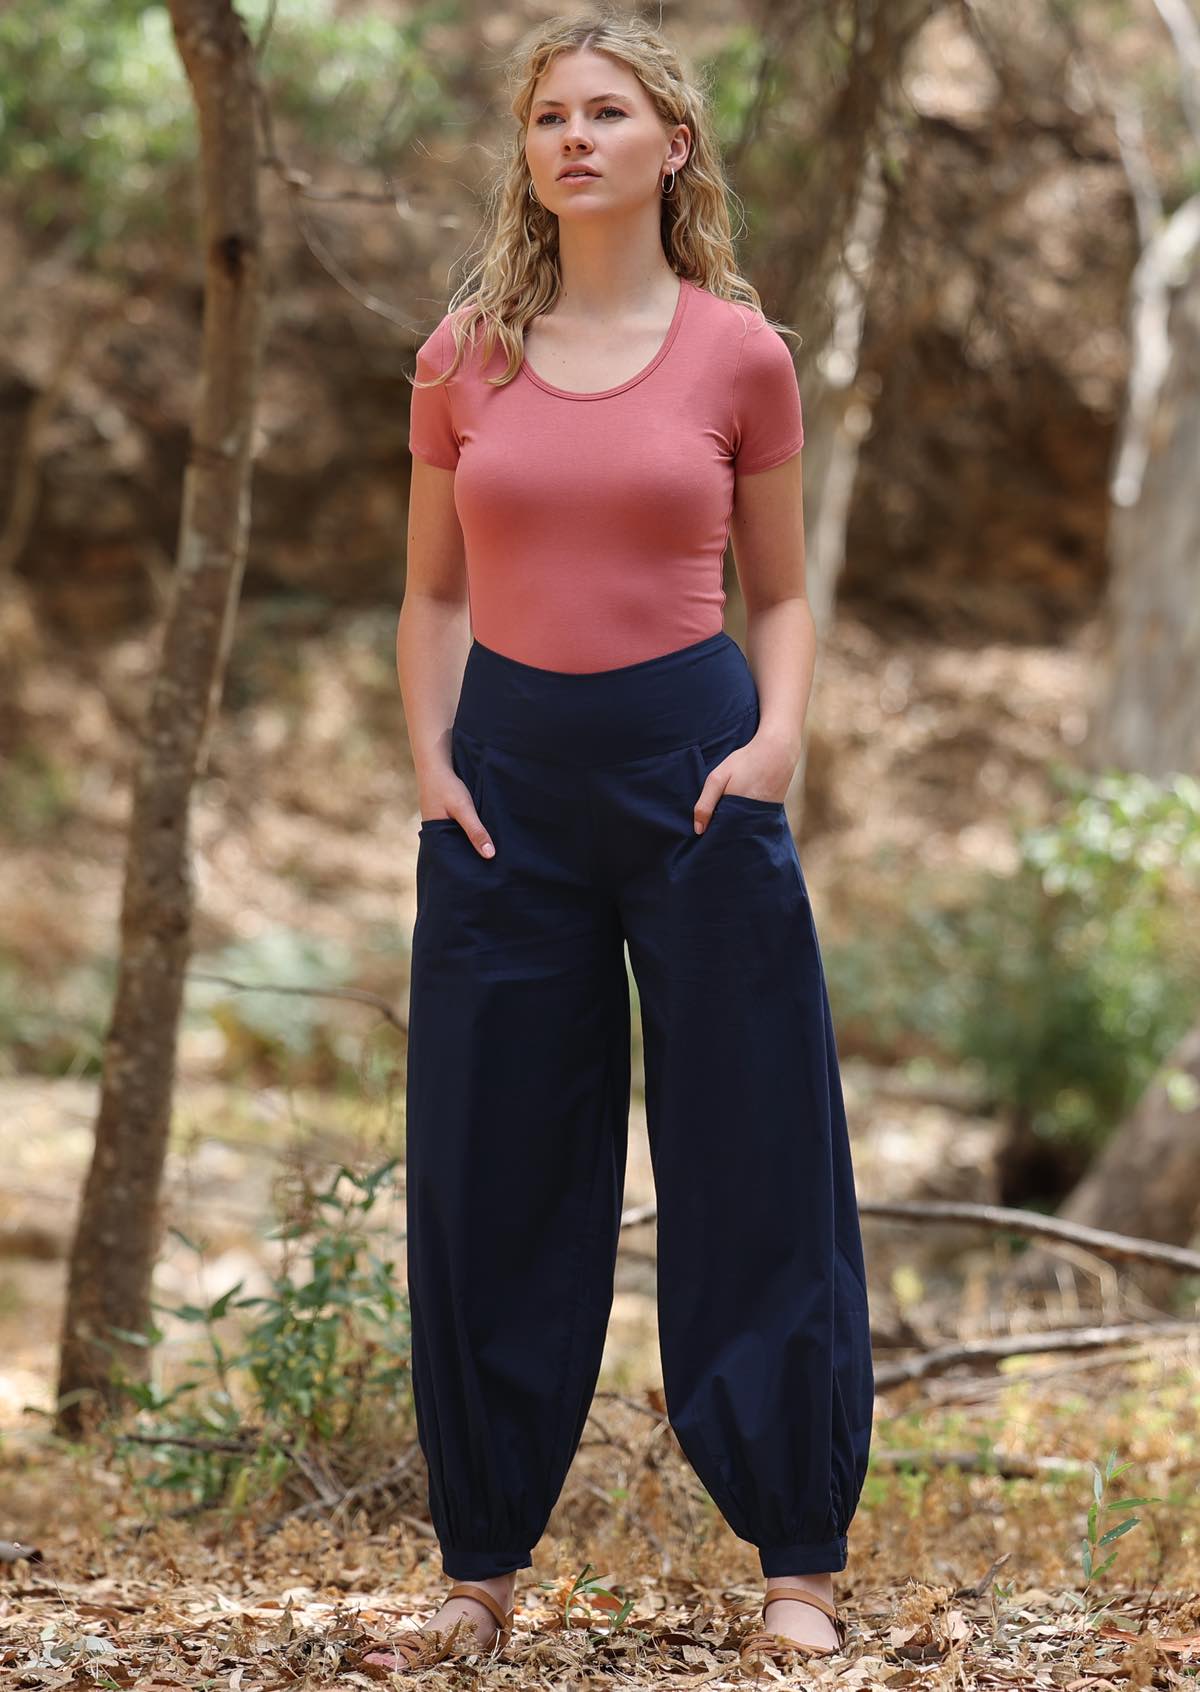 Wide waistband cotton genie pants with cuffed ankles